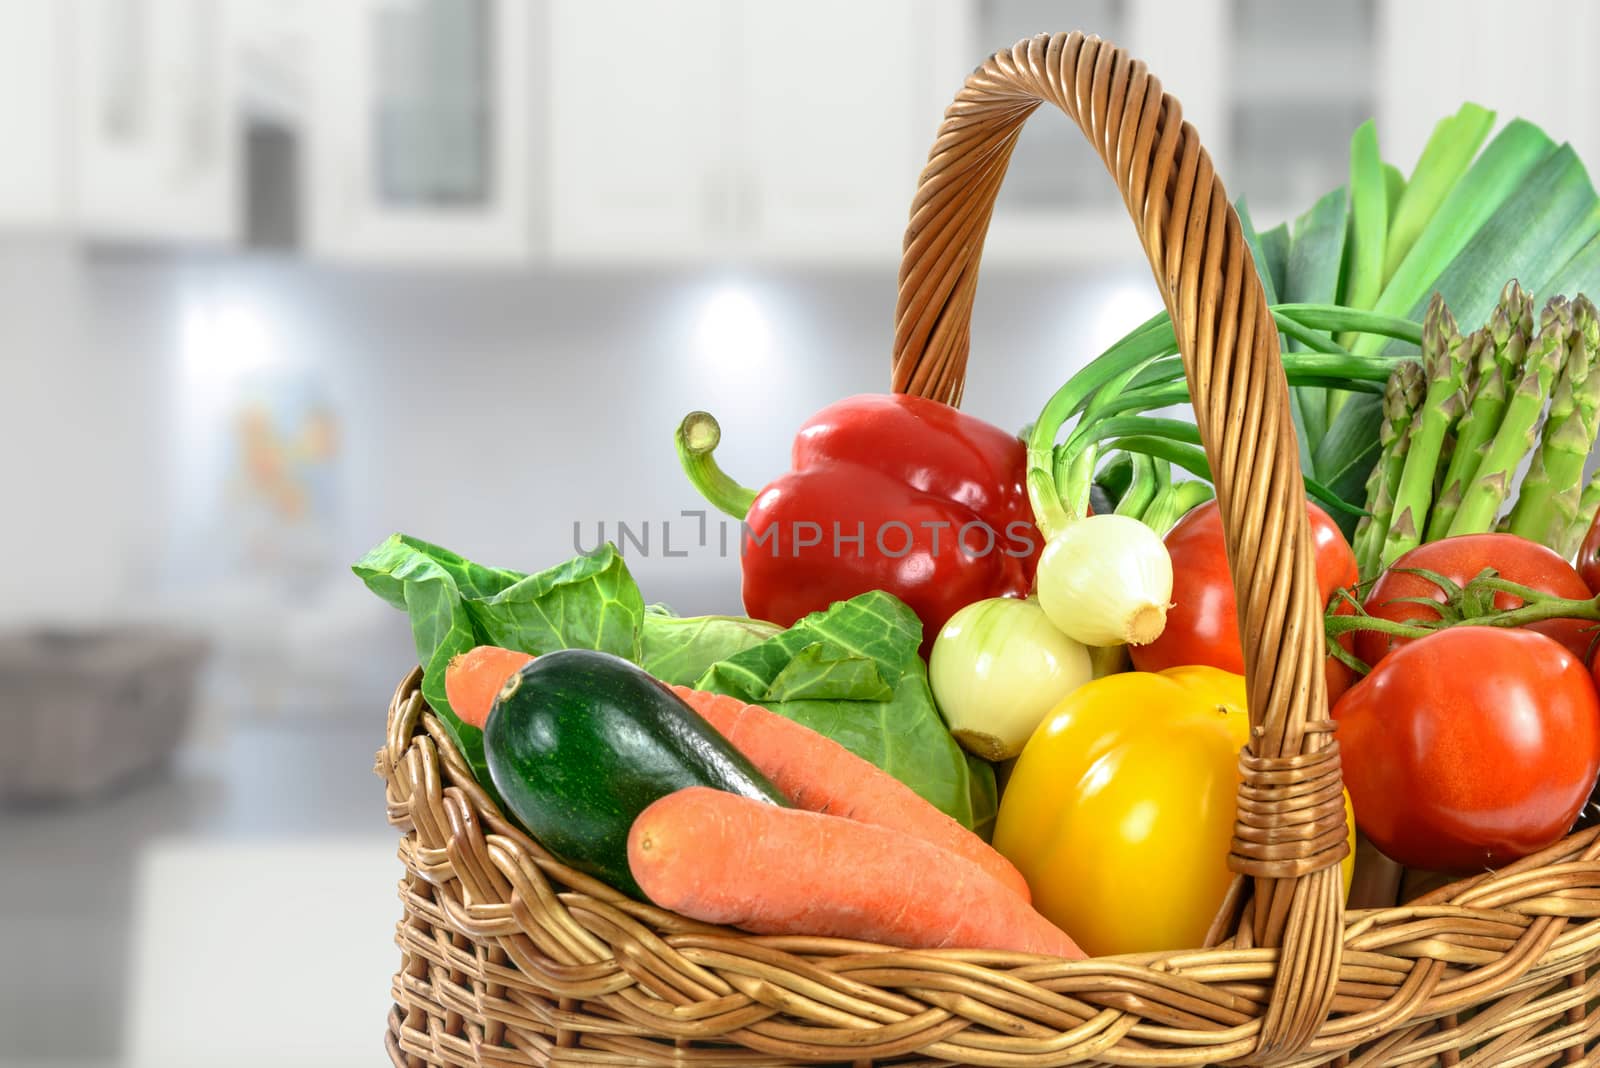 Healthy eating concept - basket full of varied fresh vegetables on a blurred background of the kitchen.